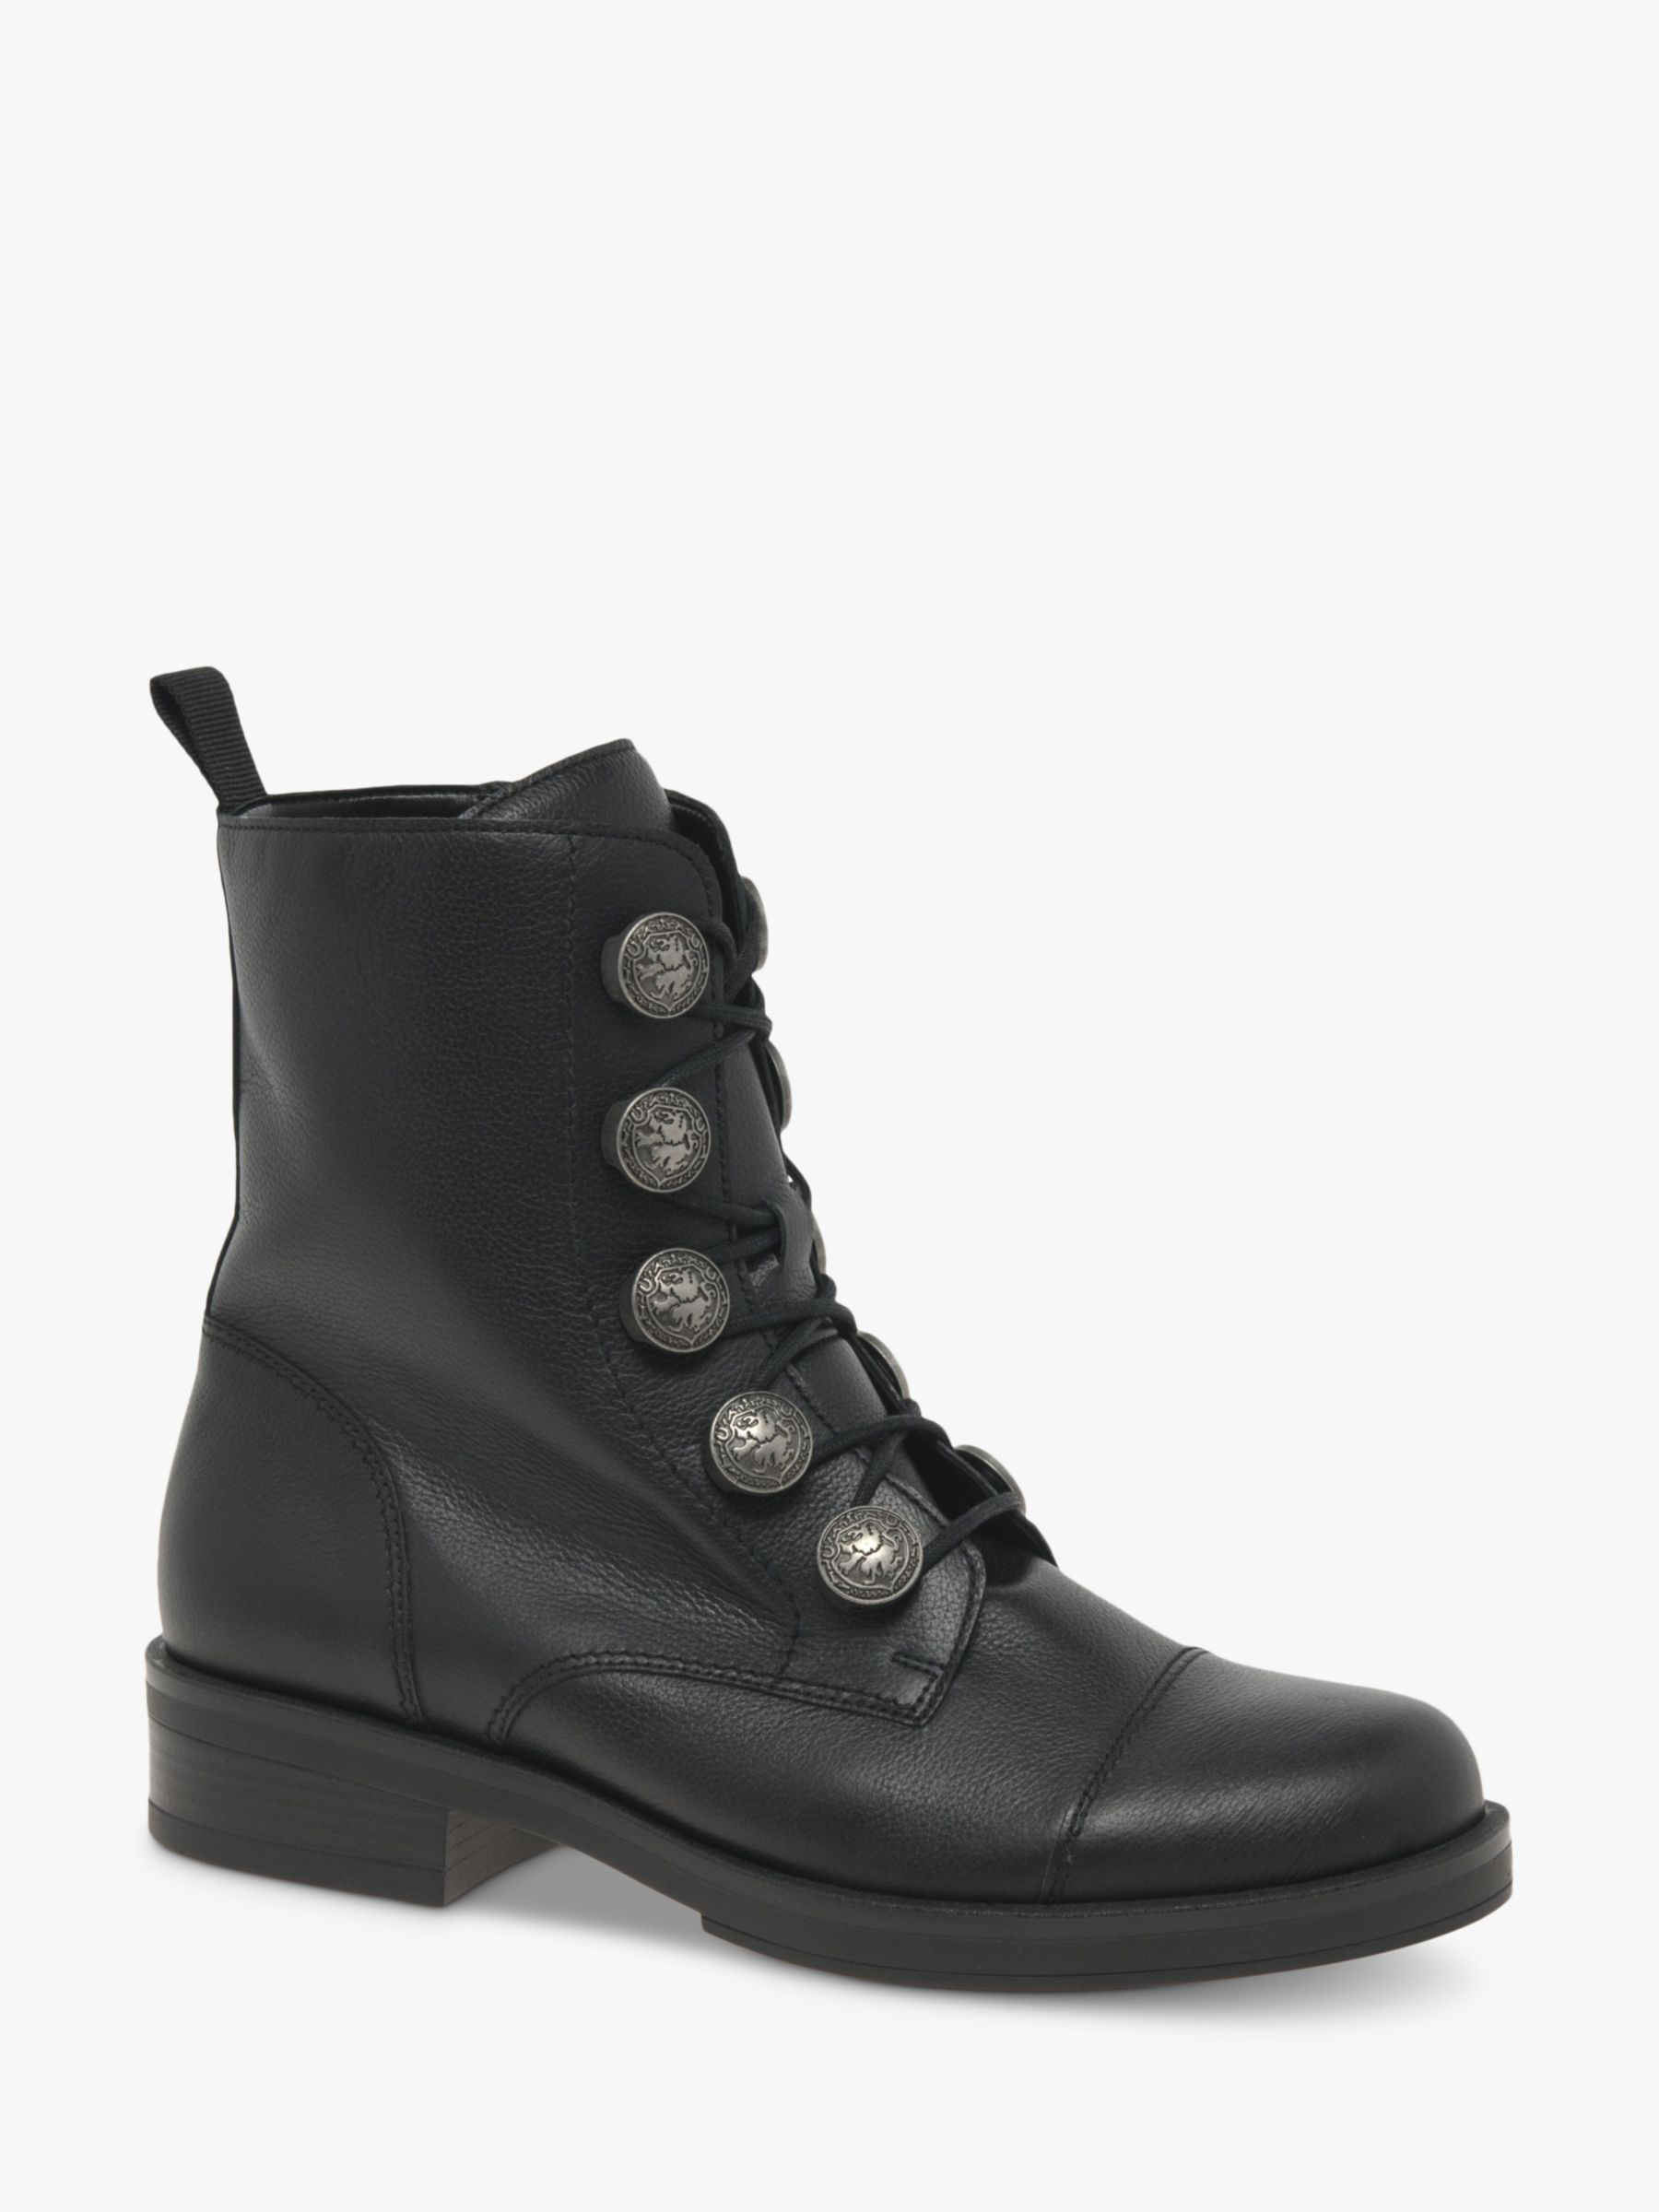 Gabor Lady Leather Military Button Ankle Boots, Black